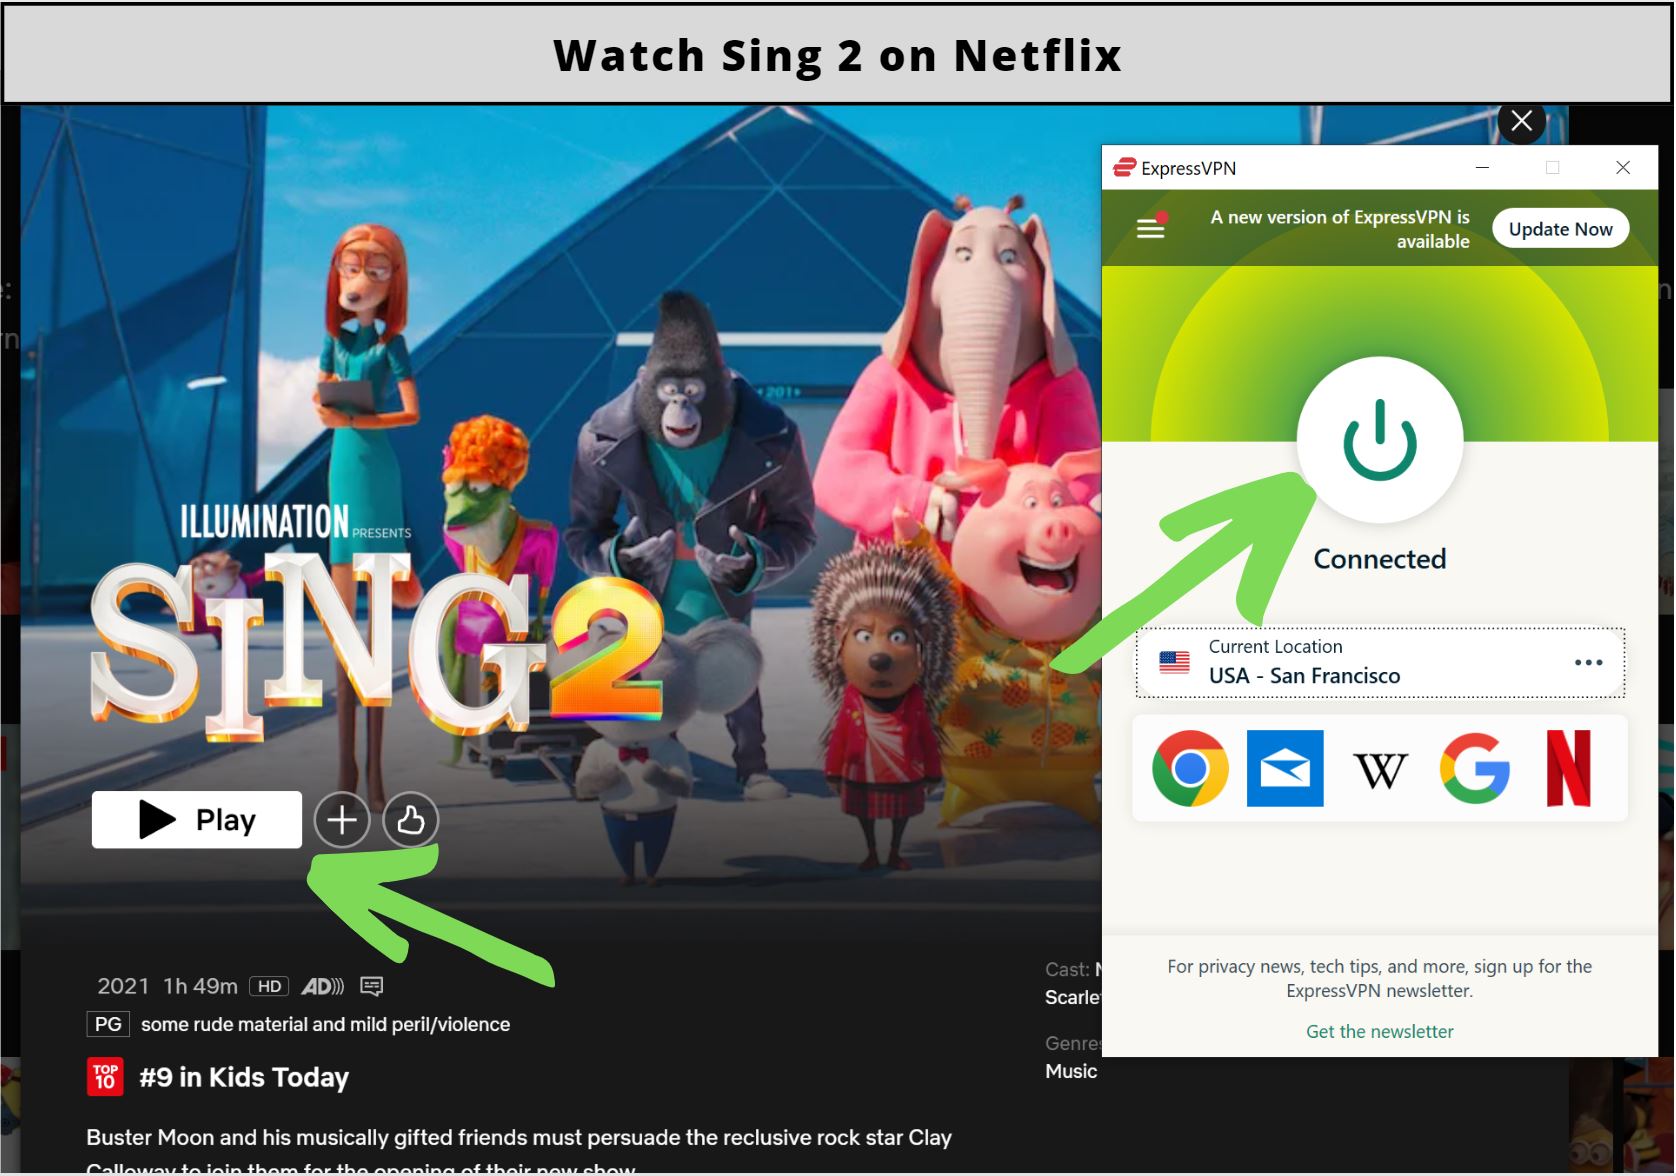 How to watch Sing 2 on Netflix